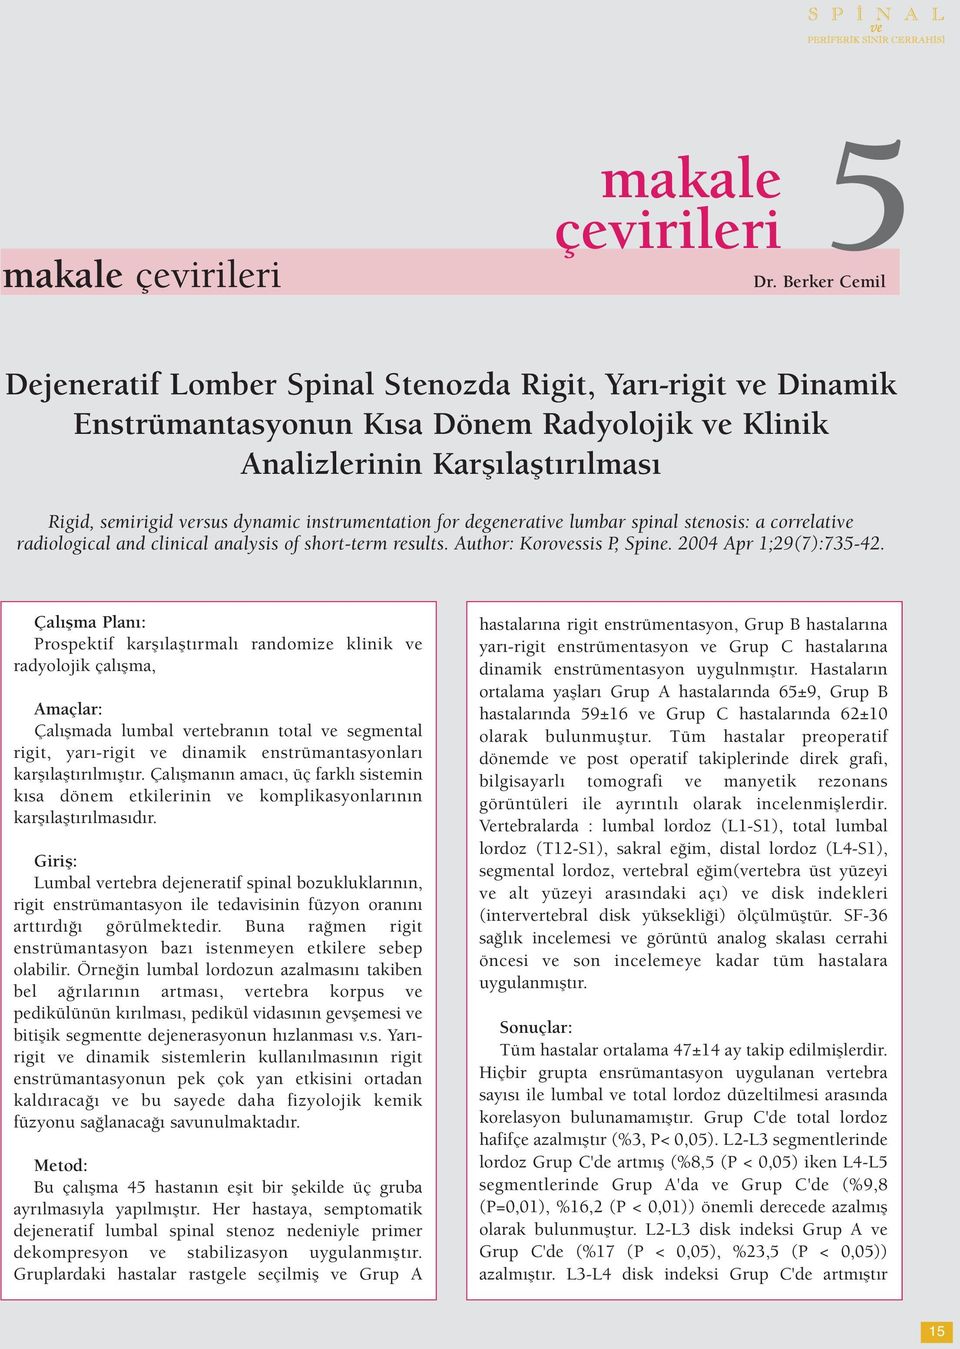 instrumentation for degenerative lumbar spinal stenosis: a correlative radiological and clinical analysis of short-term results. Author: Korovessis P, Spine. 2004 Apr 1;29(7):735-42.